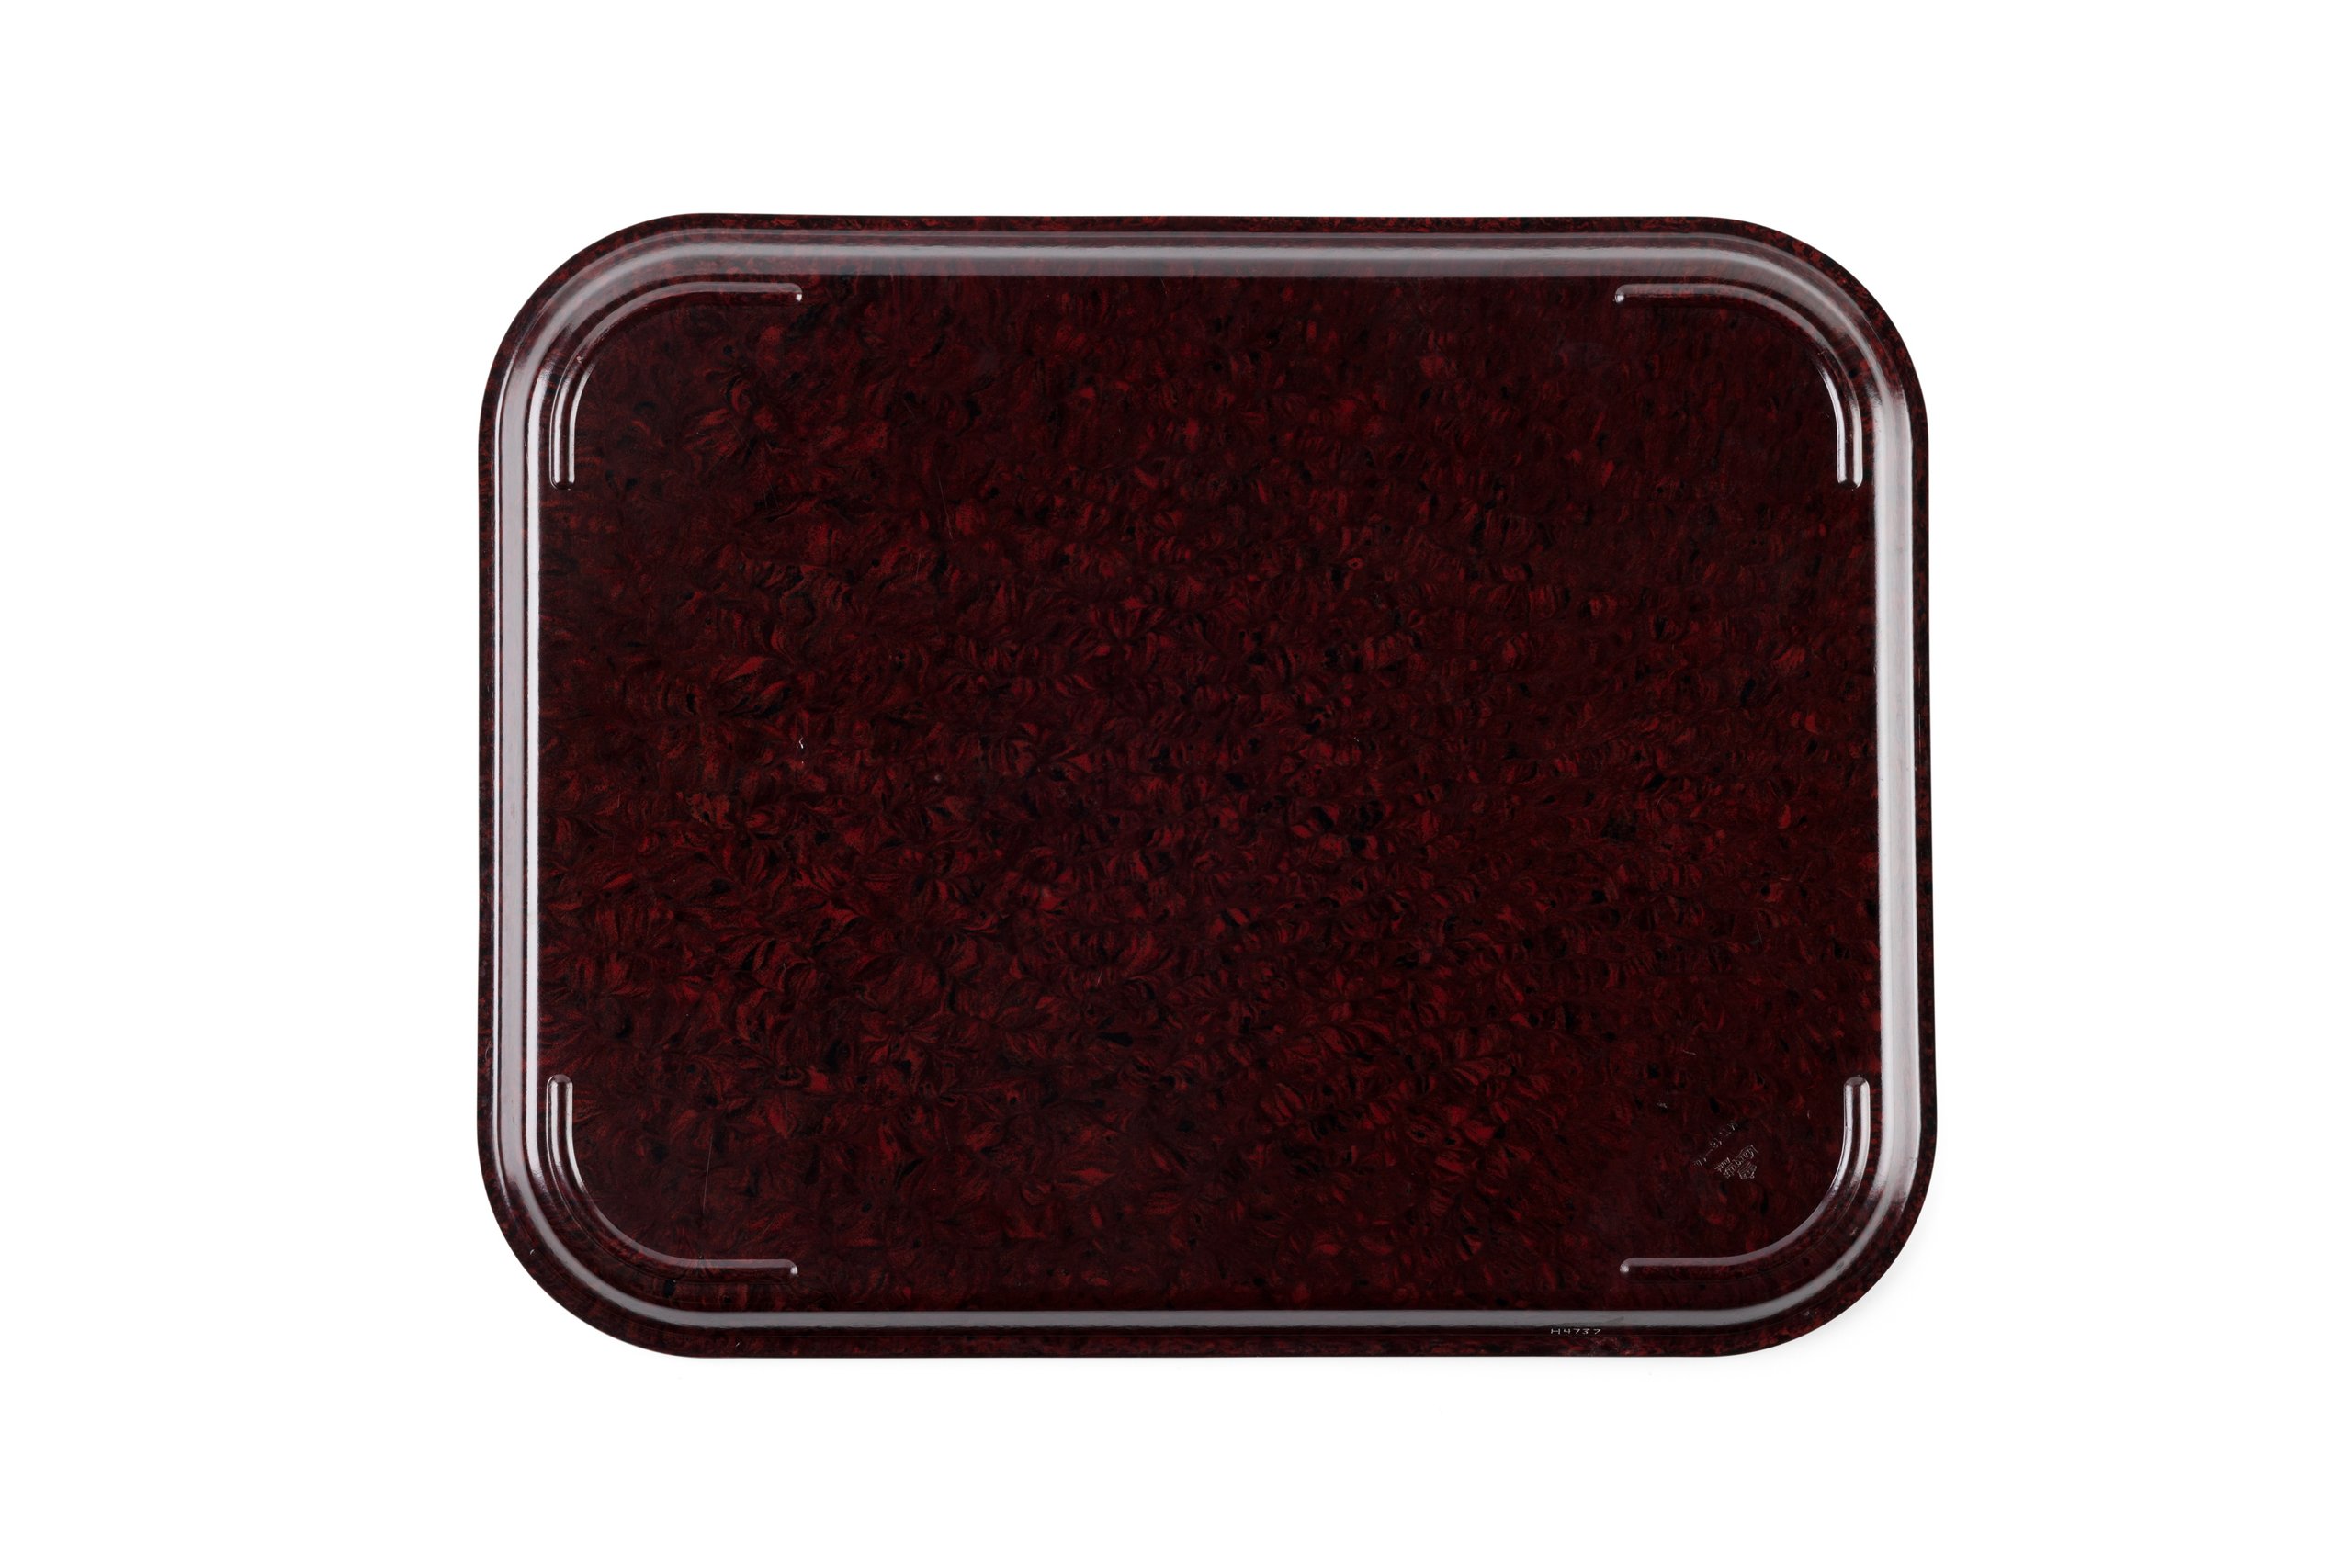 'Marquis' melamine-formaldehyde mess tray